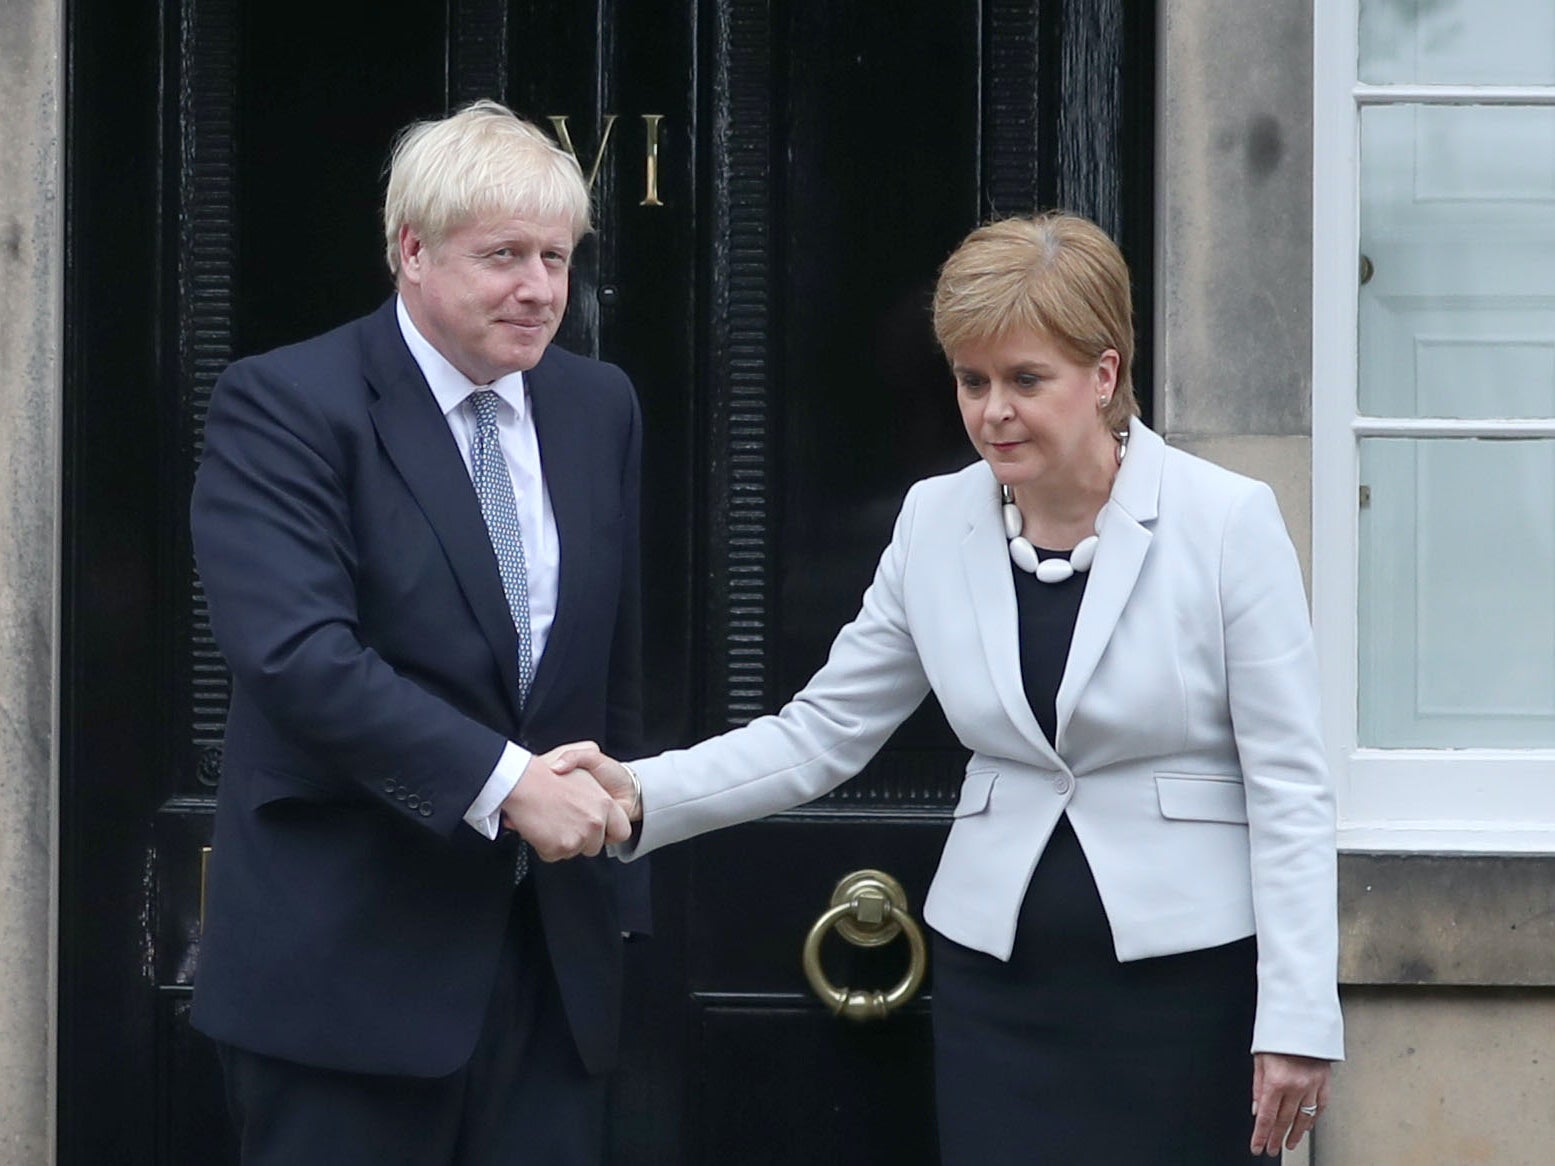 ‘Quite agree, Nicola: the goalposts are now over there’